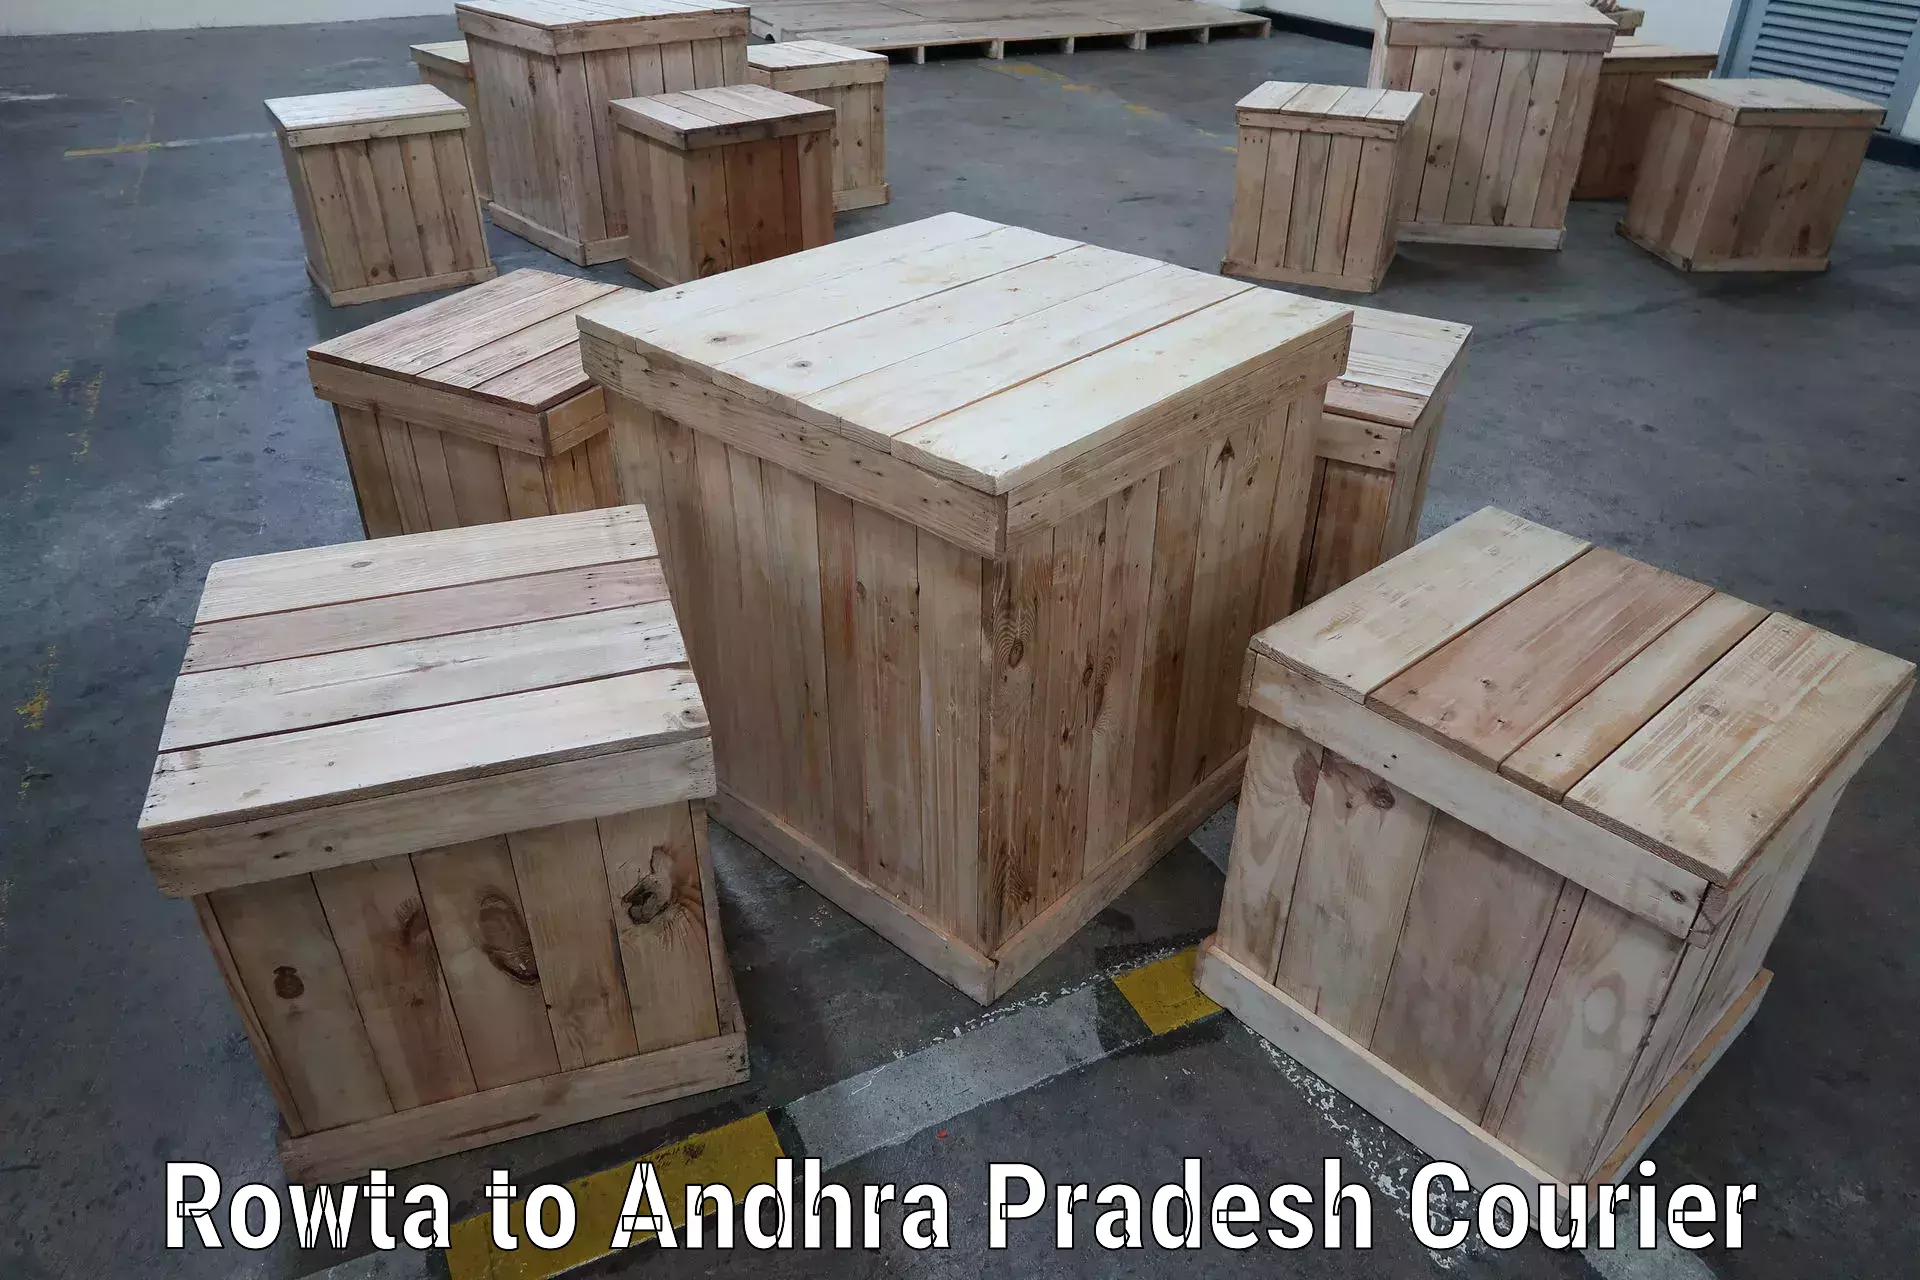 State-of-the-art courier technology Rowta to Andhra Pradesh